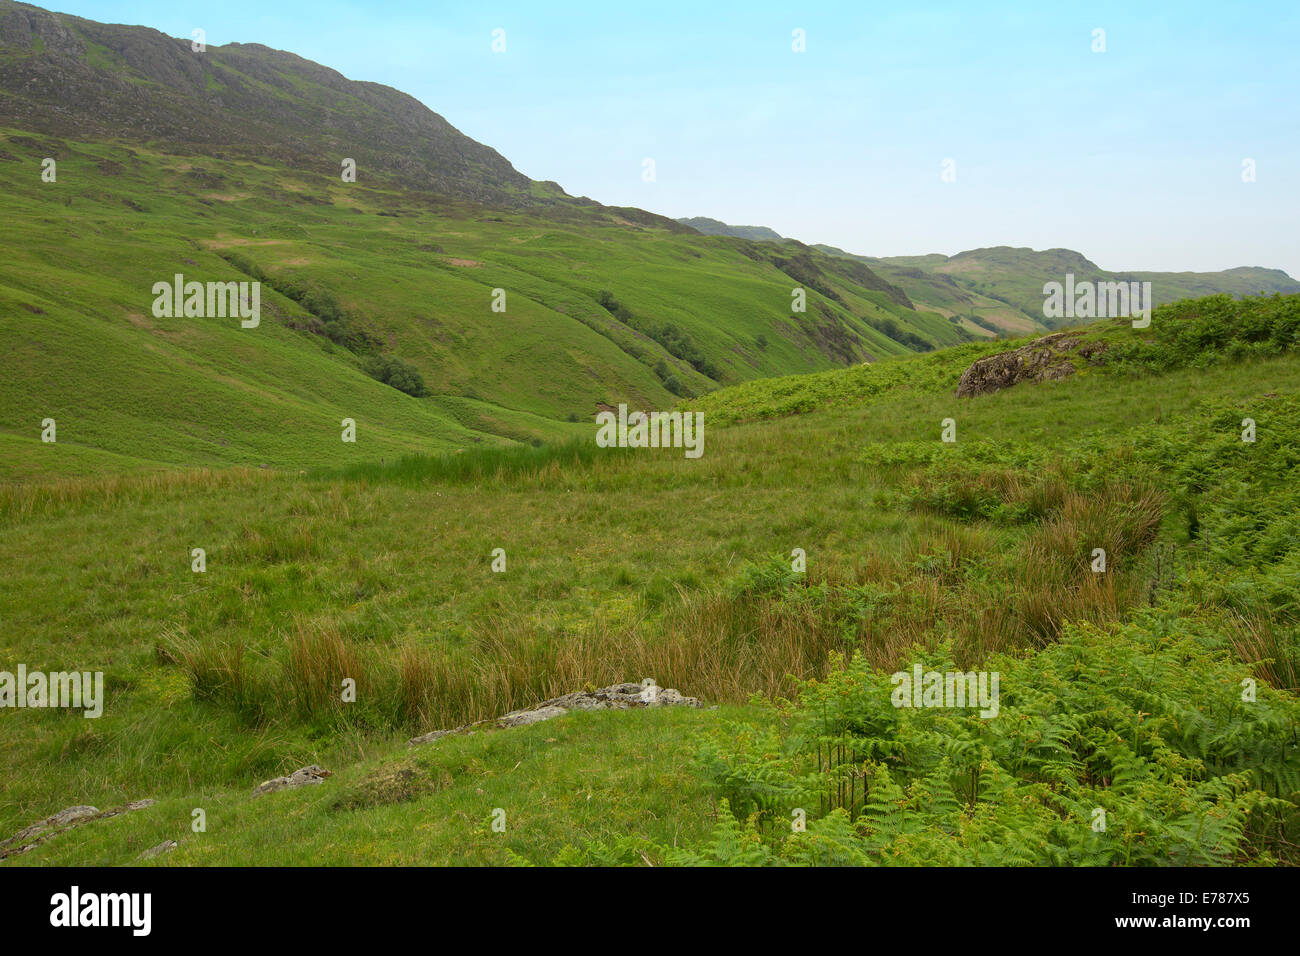 Vast landscape of emerald cloaked treeless hills and valleys under blue sky at Hardknott Pass, Cumbria, England Stock Photo